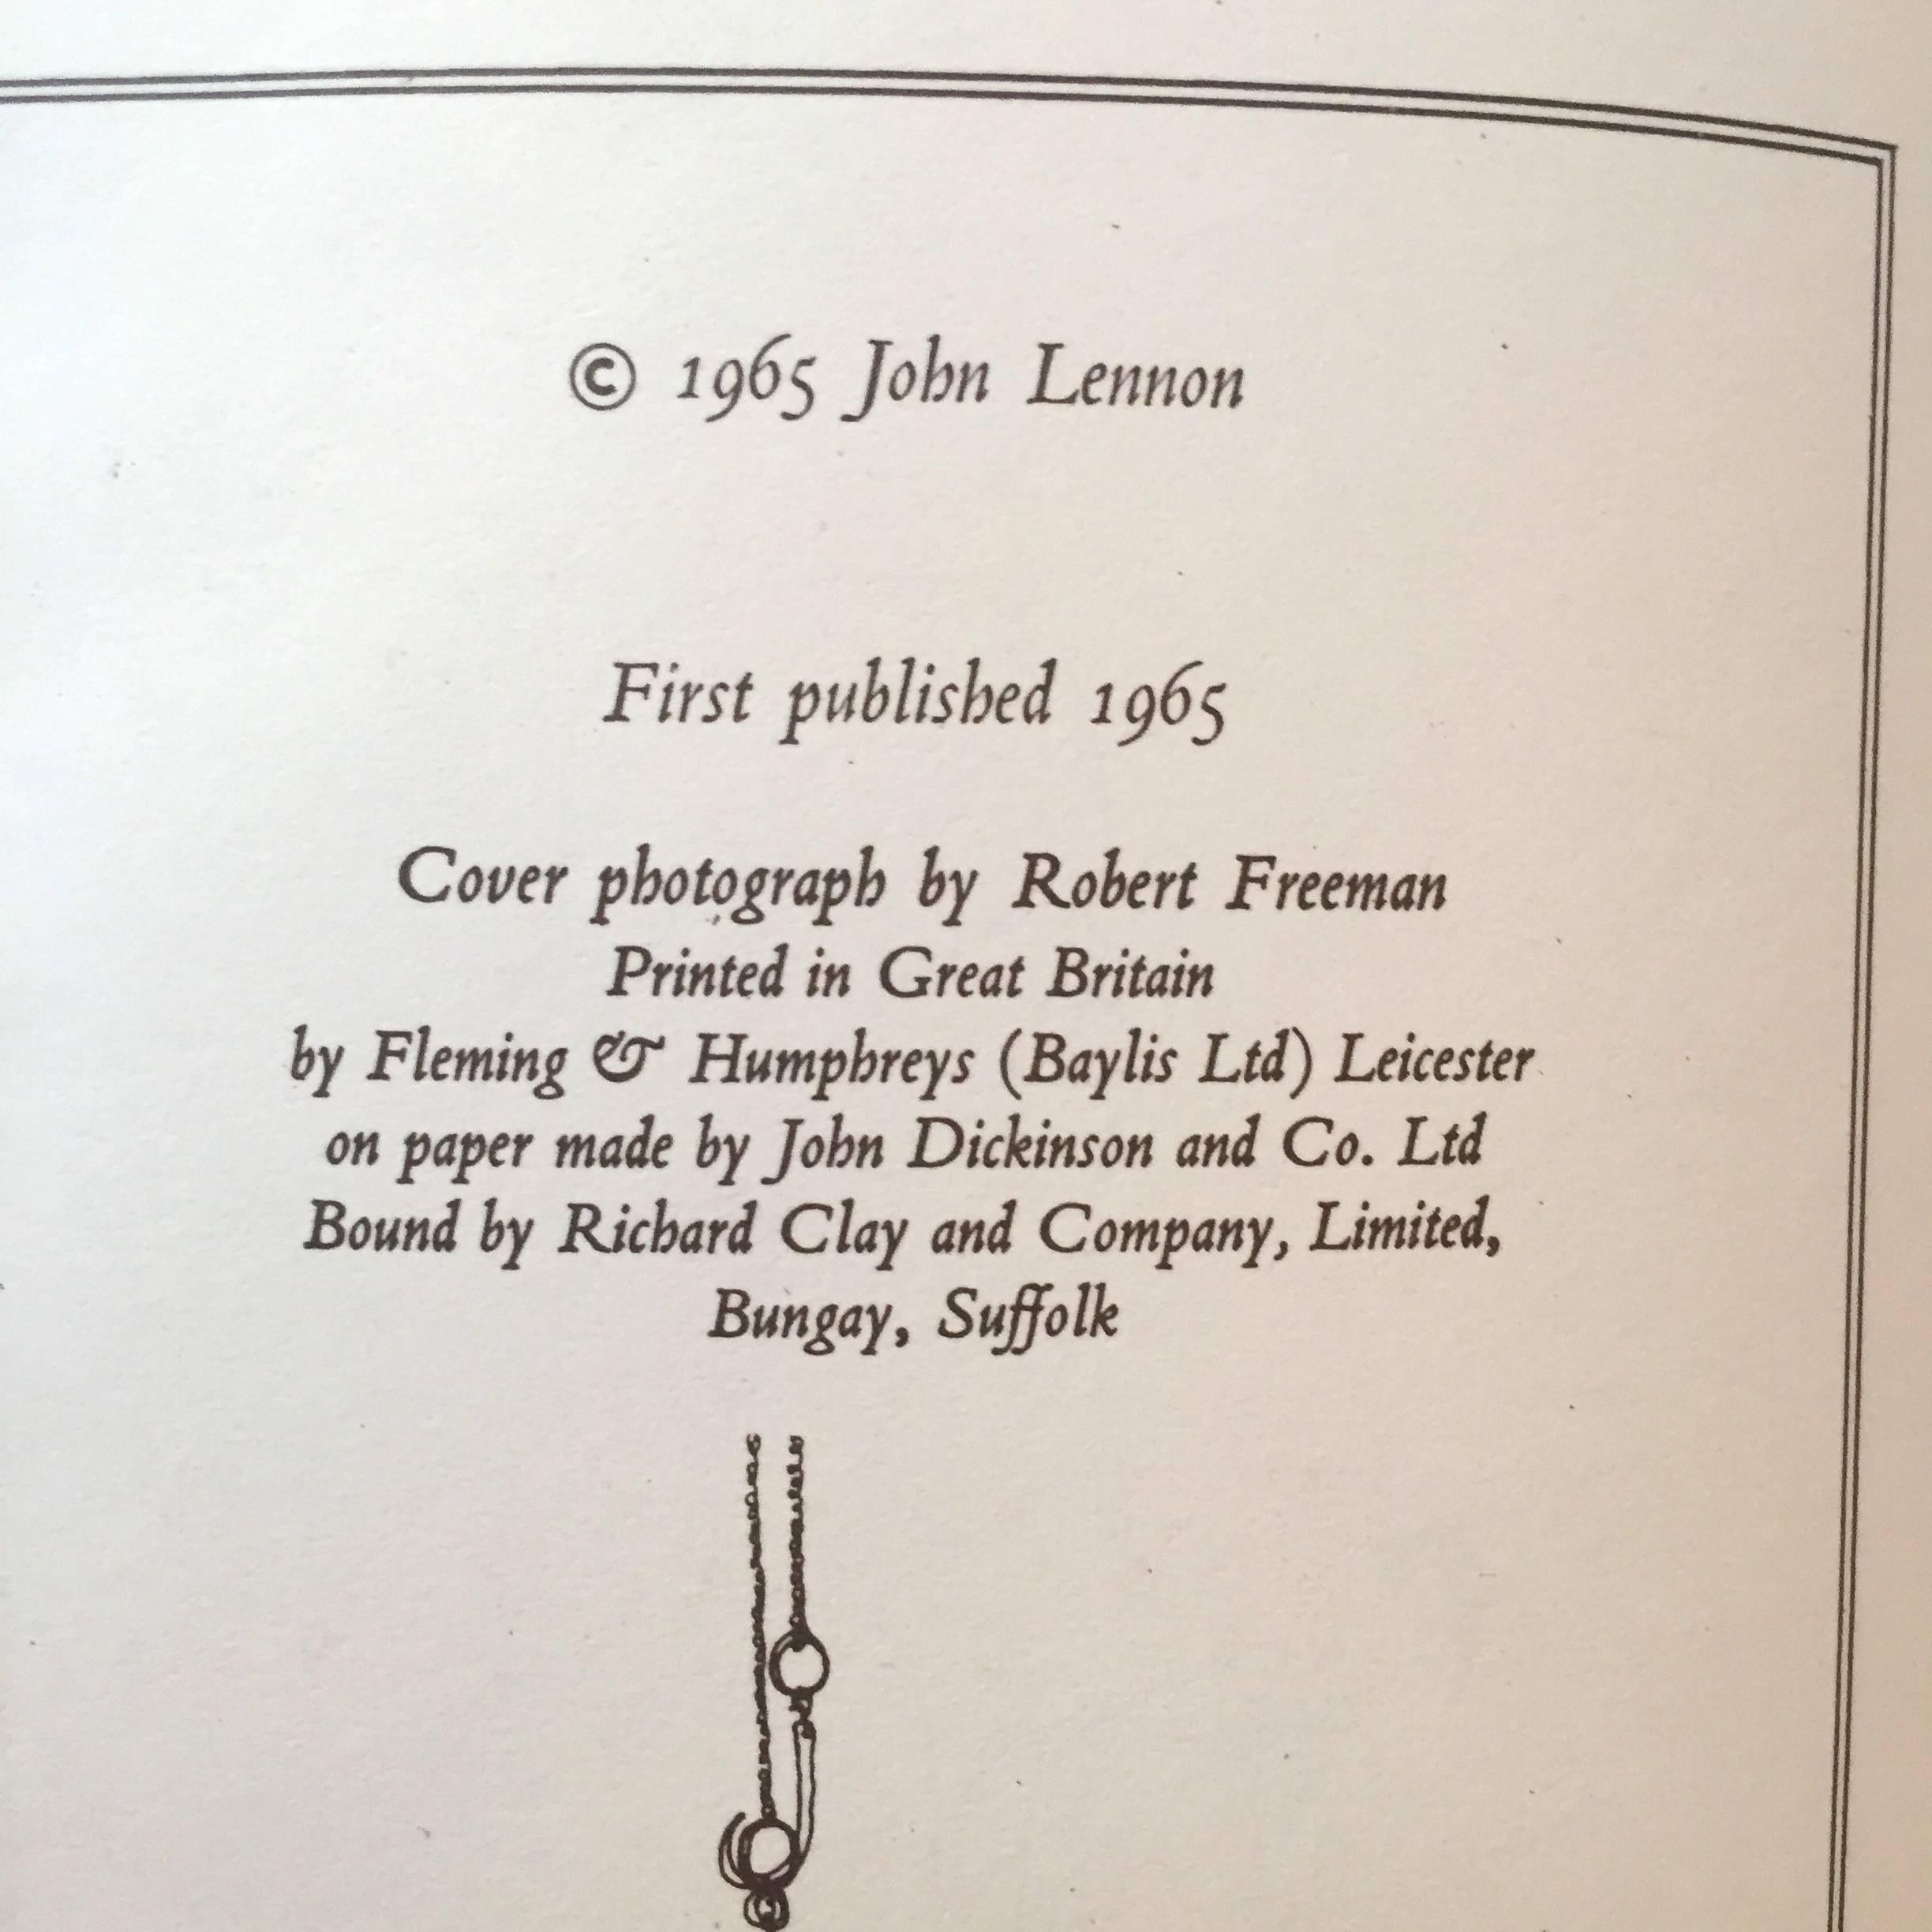 First edition, published by Jonathan Cape, London, 1965.

Following the success of his first book, 'In His Own Write', John Lennon's second collection of nonsensical and now politically incorrect stories, absurdist drawings and poems is brilliant.